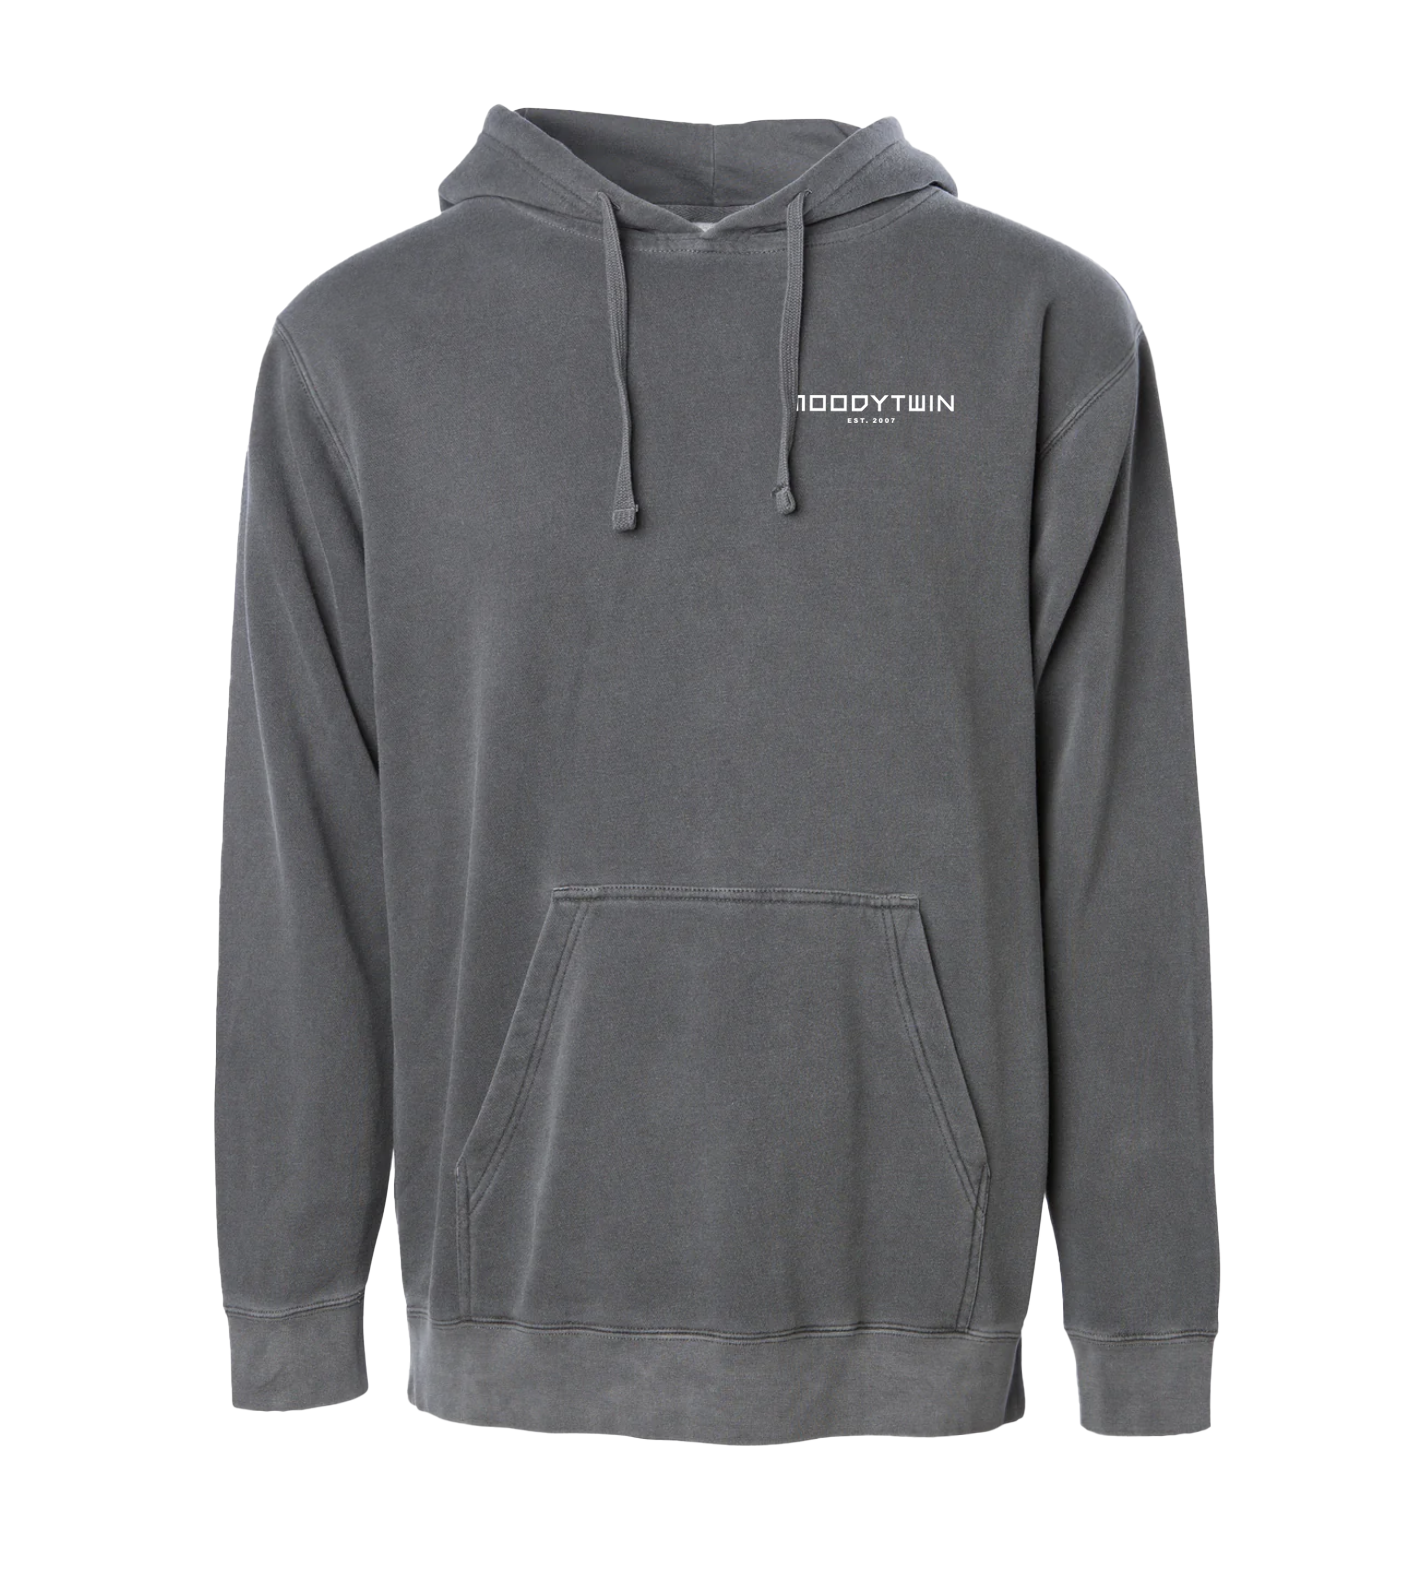 Signature Pigment Hoodie (Washed Black)